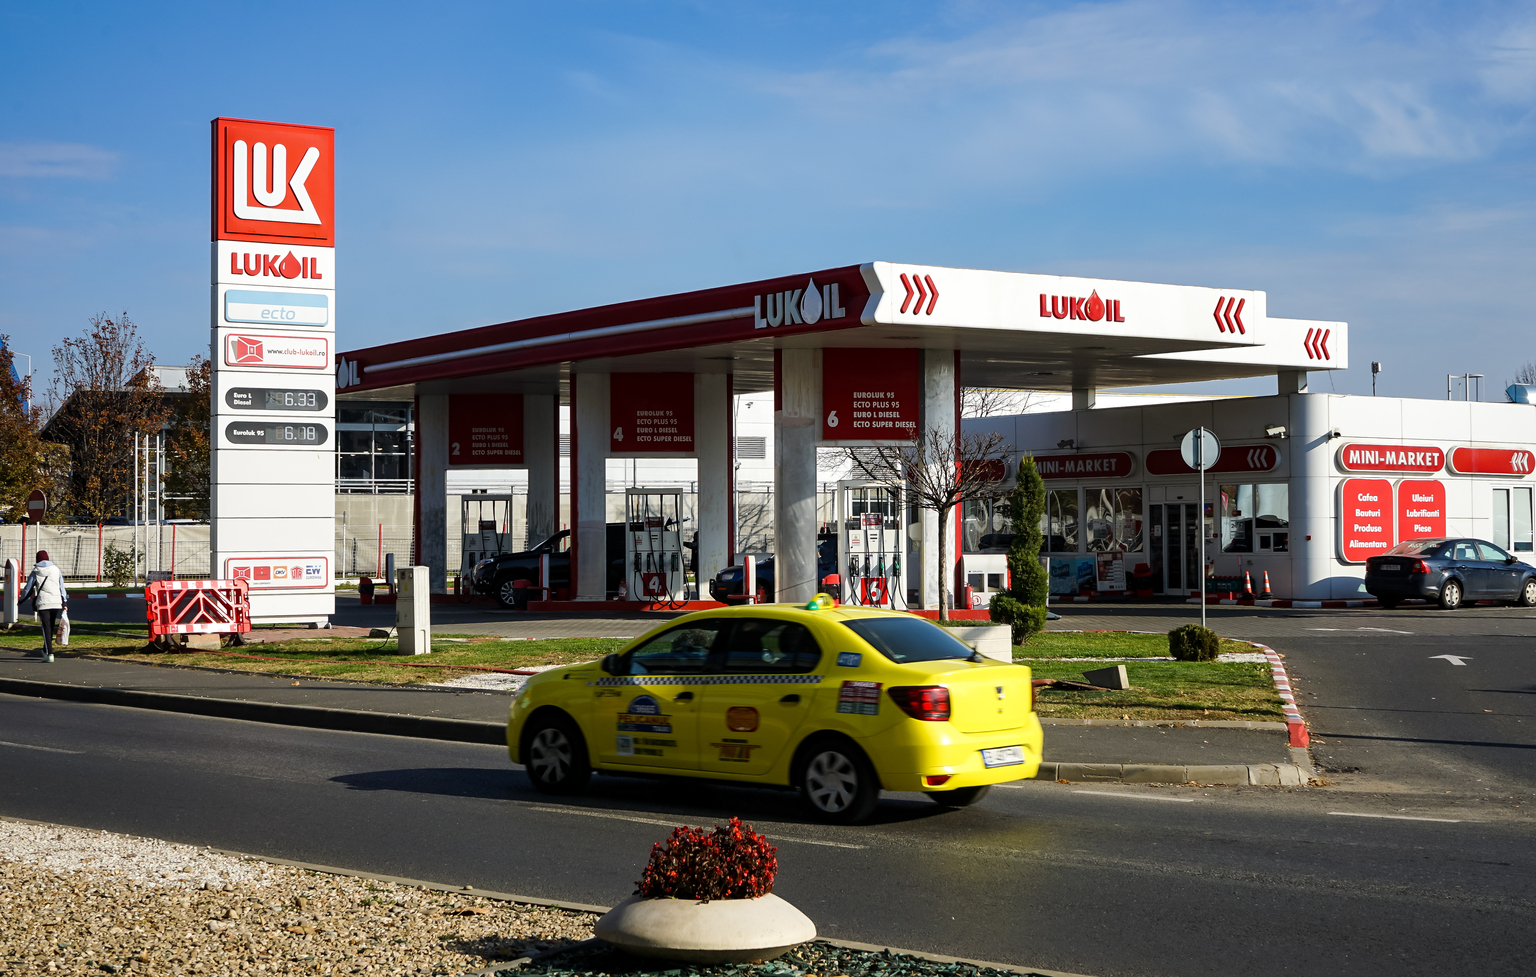 Lukoil gas station